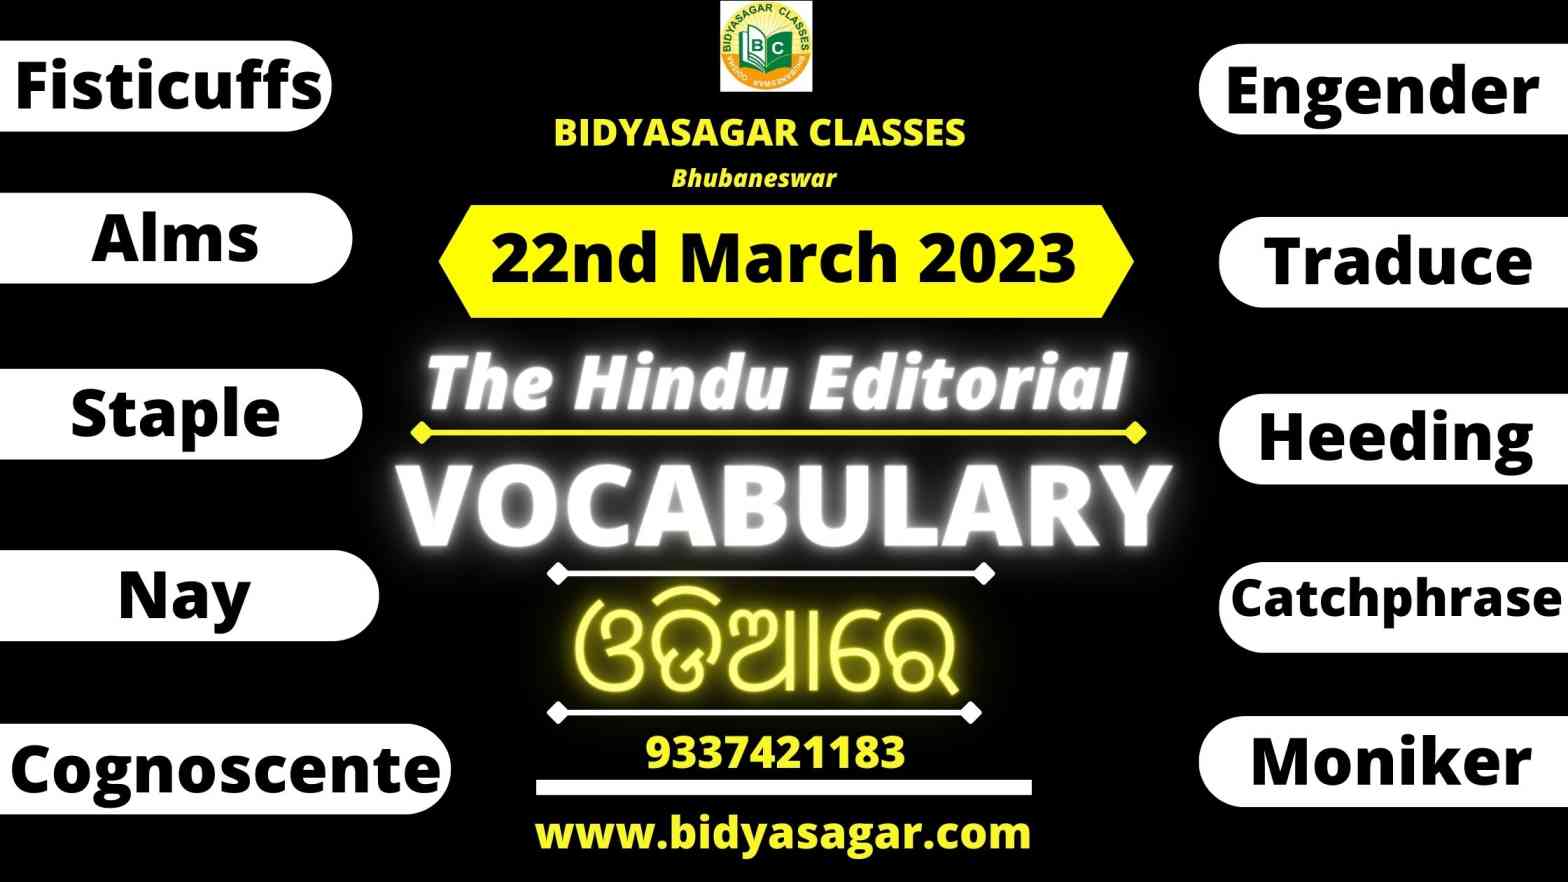 The Hindu Editorial Vocabulary of 22nd March 2023